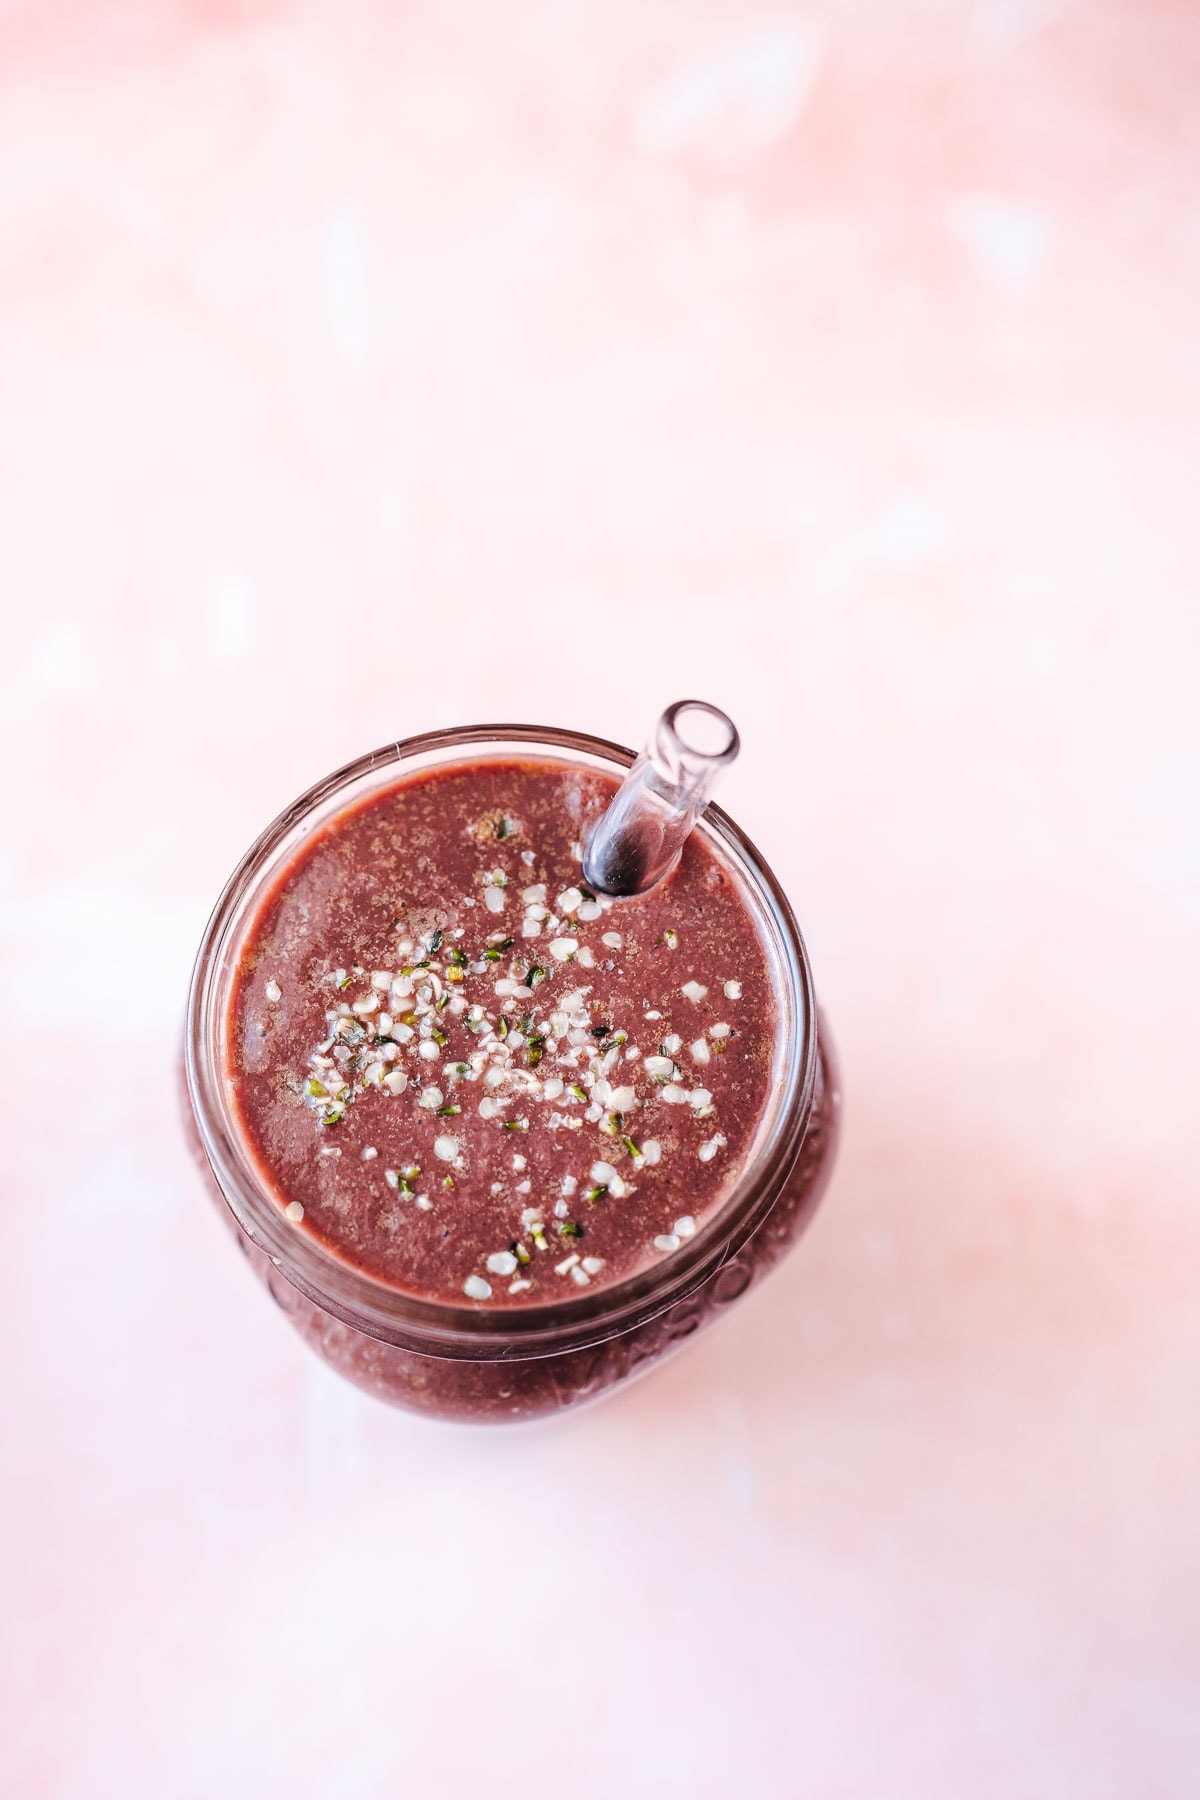 Top view of a purple smoothie sprinkled with seeds in a glass jar with a glass straw.